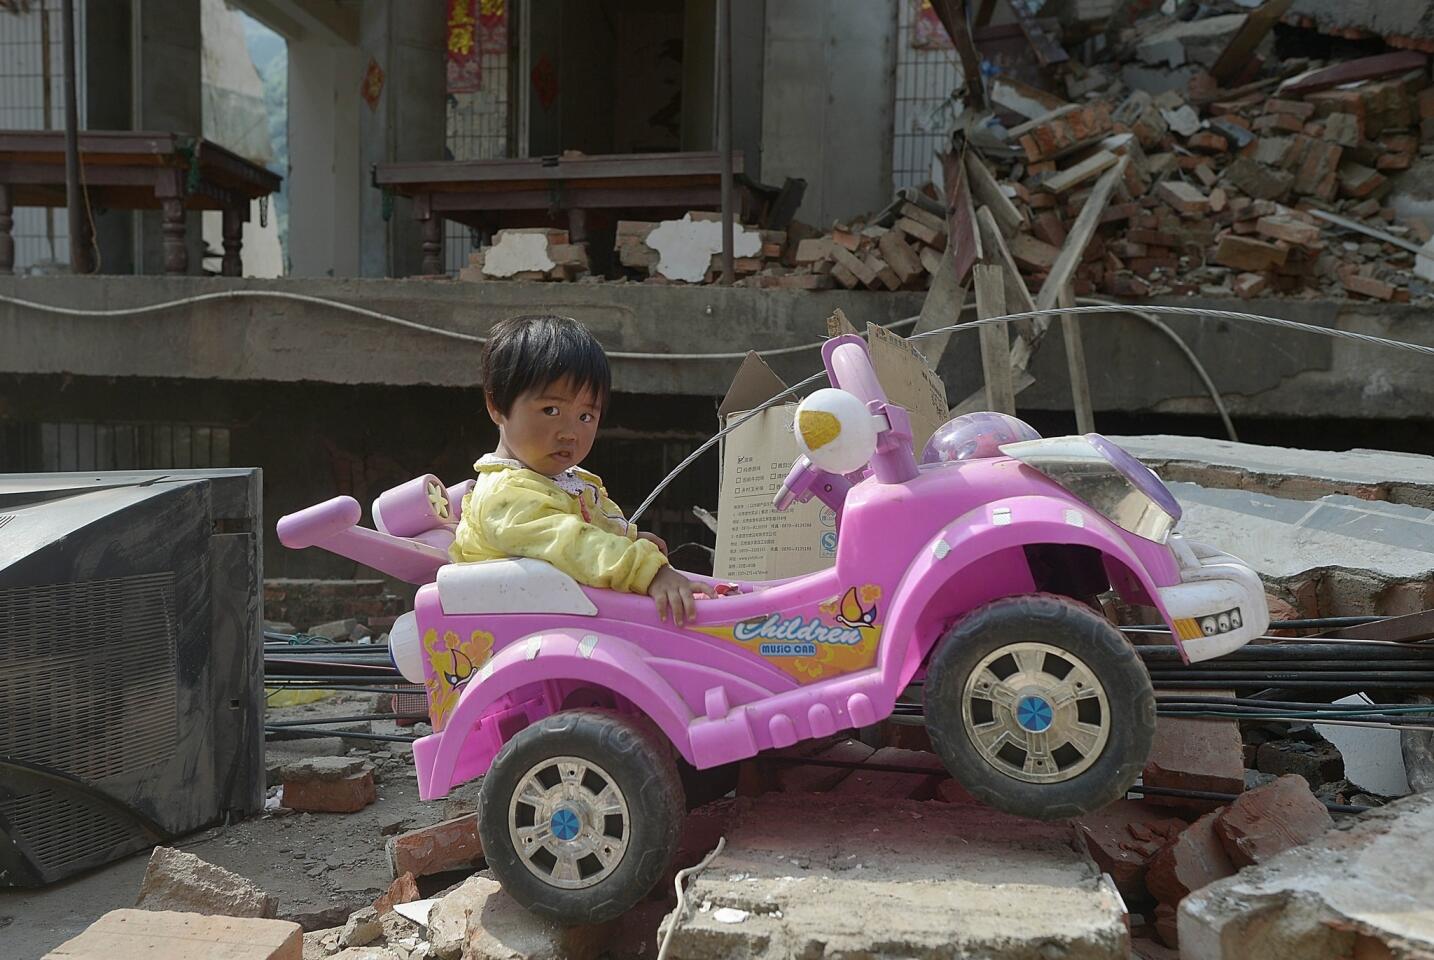 Yan Jiajia, 2, sits on her electric car, which her father dug out of the rubble of their quake-damaged house in Longtoushan township.